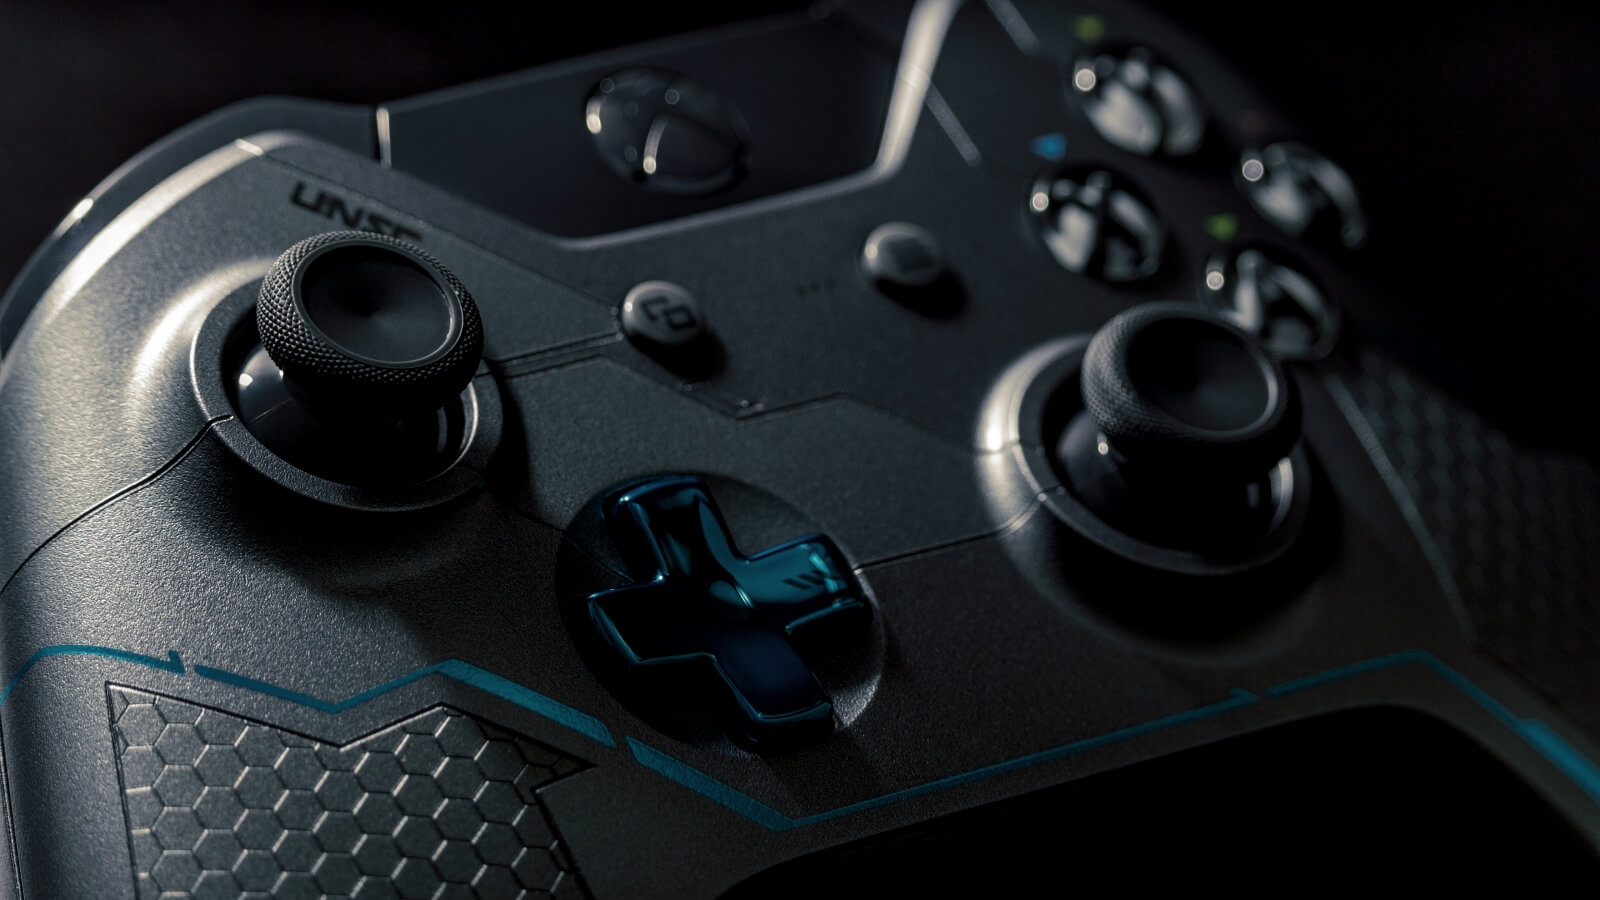 how to use a xbox one controller on steam